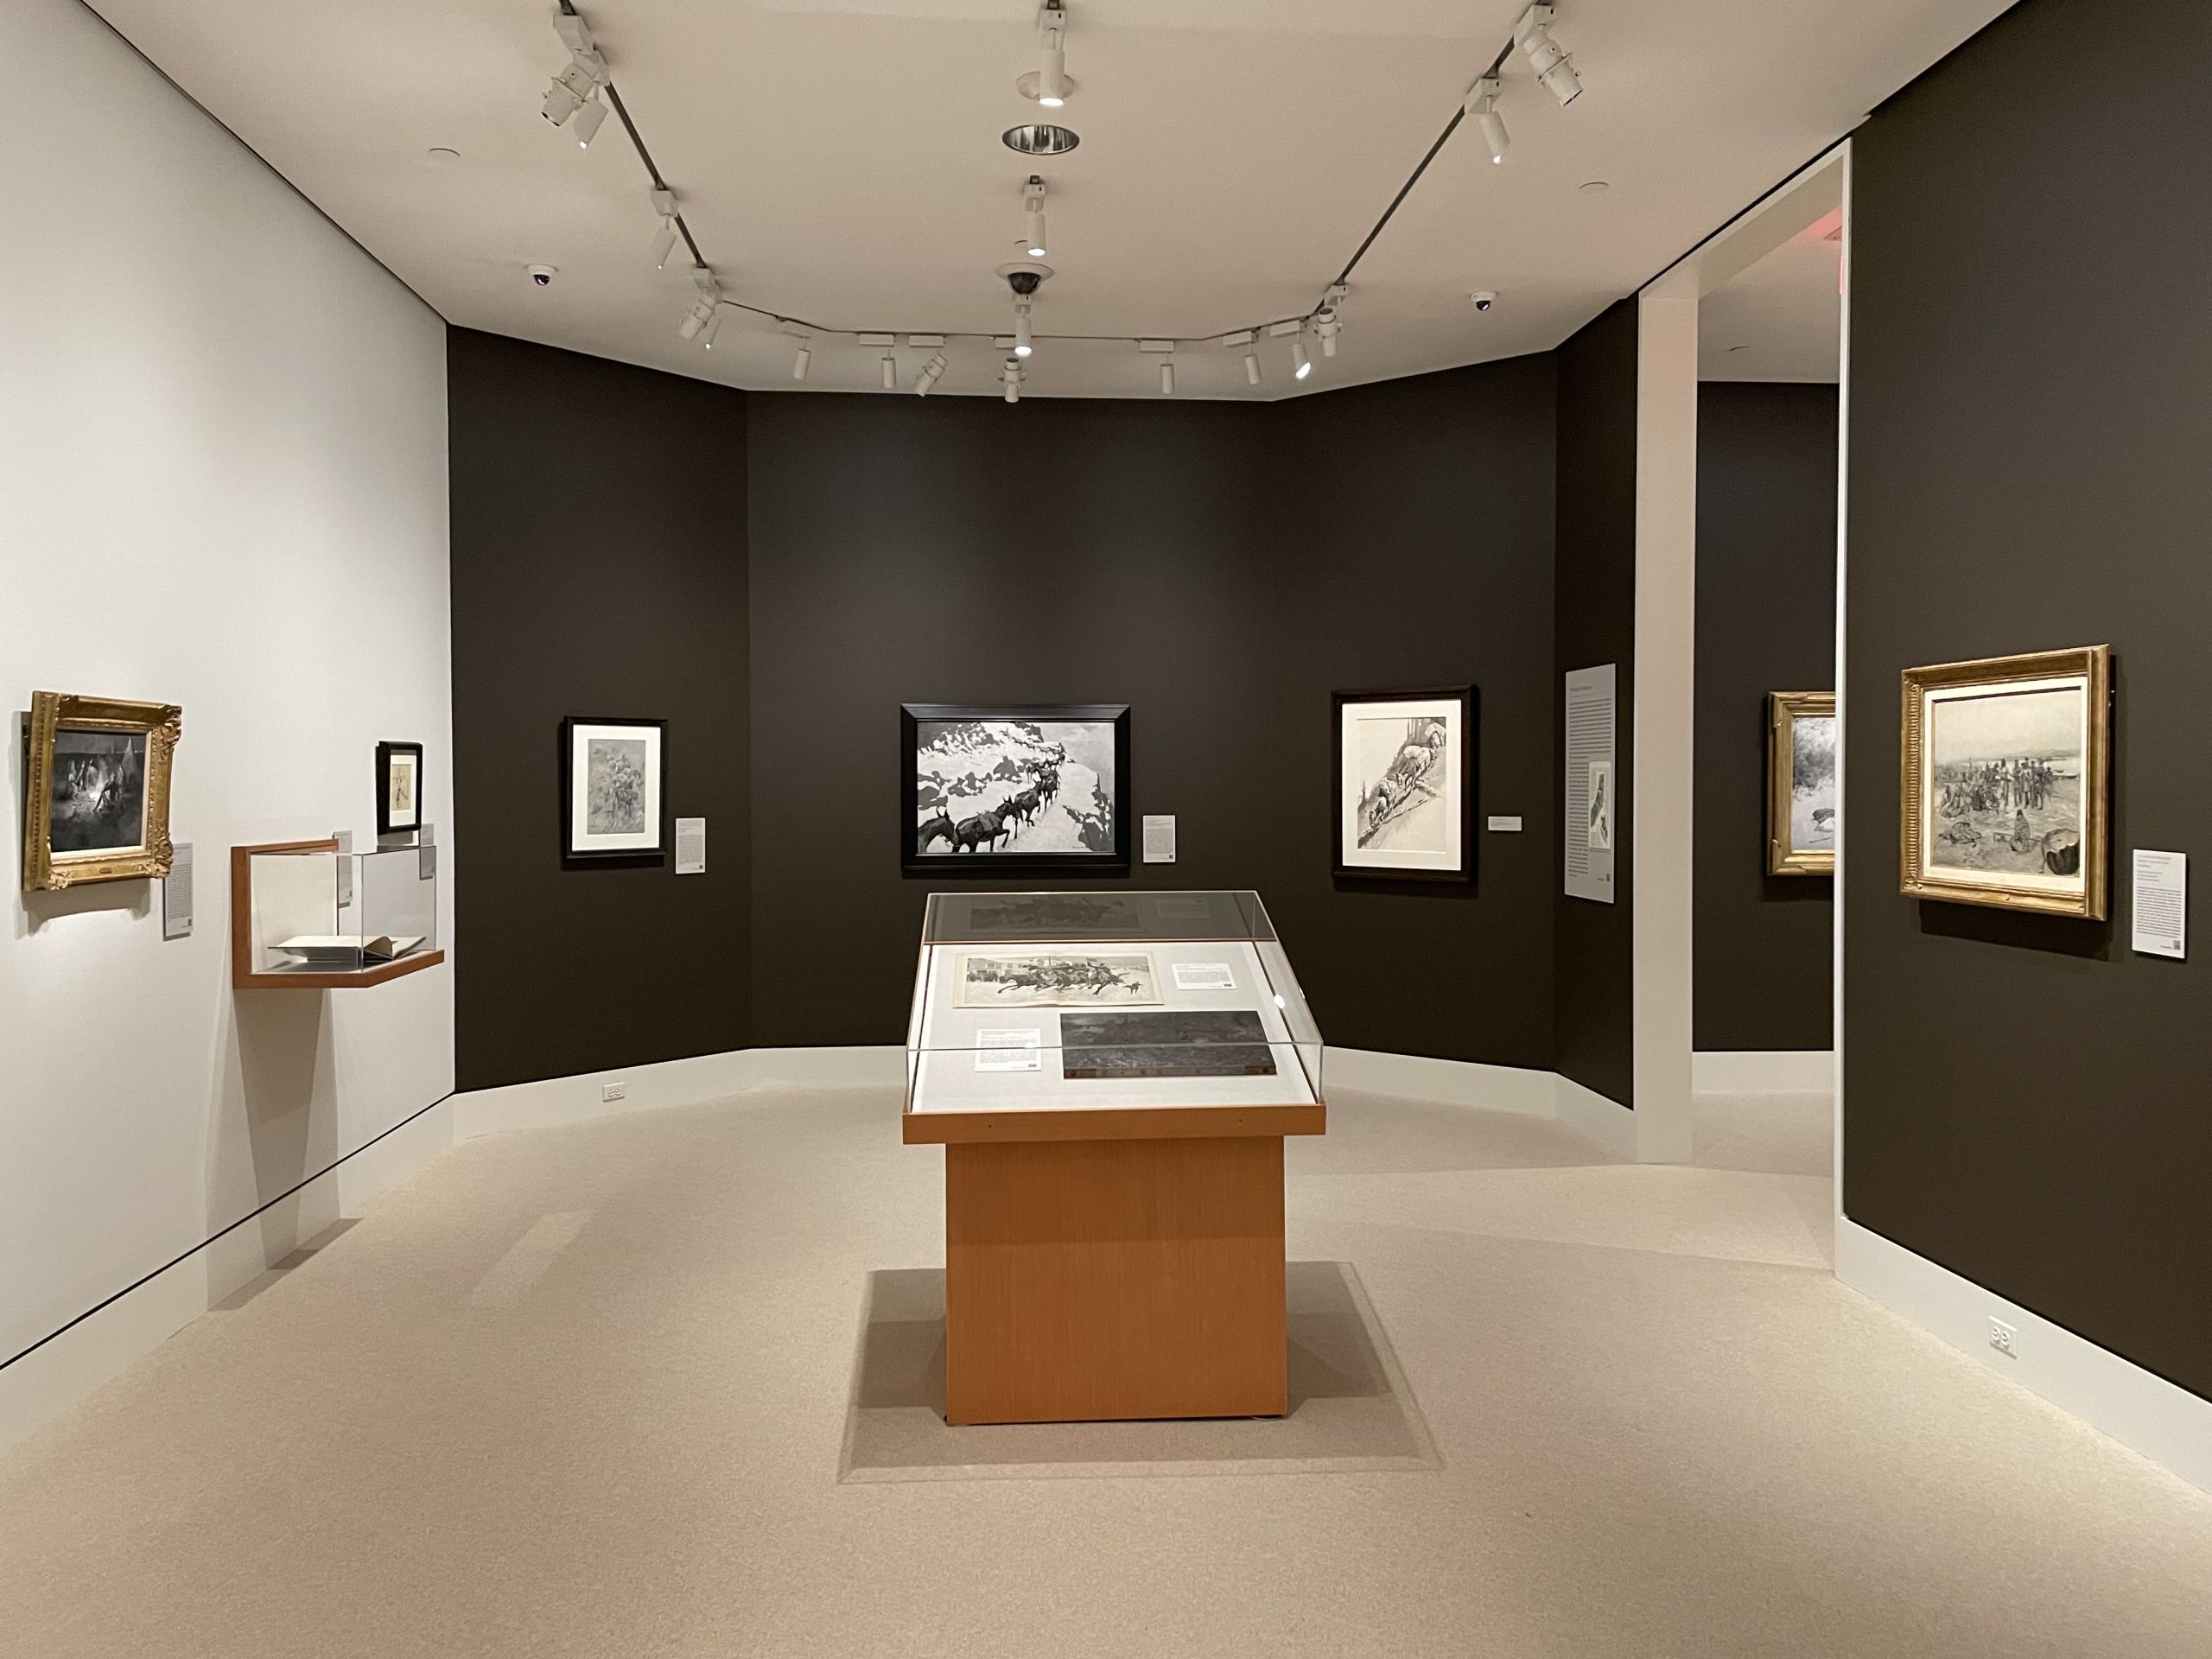 A view of a museum gallery.